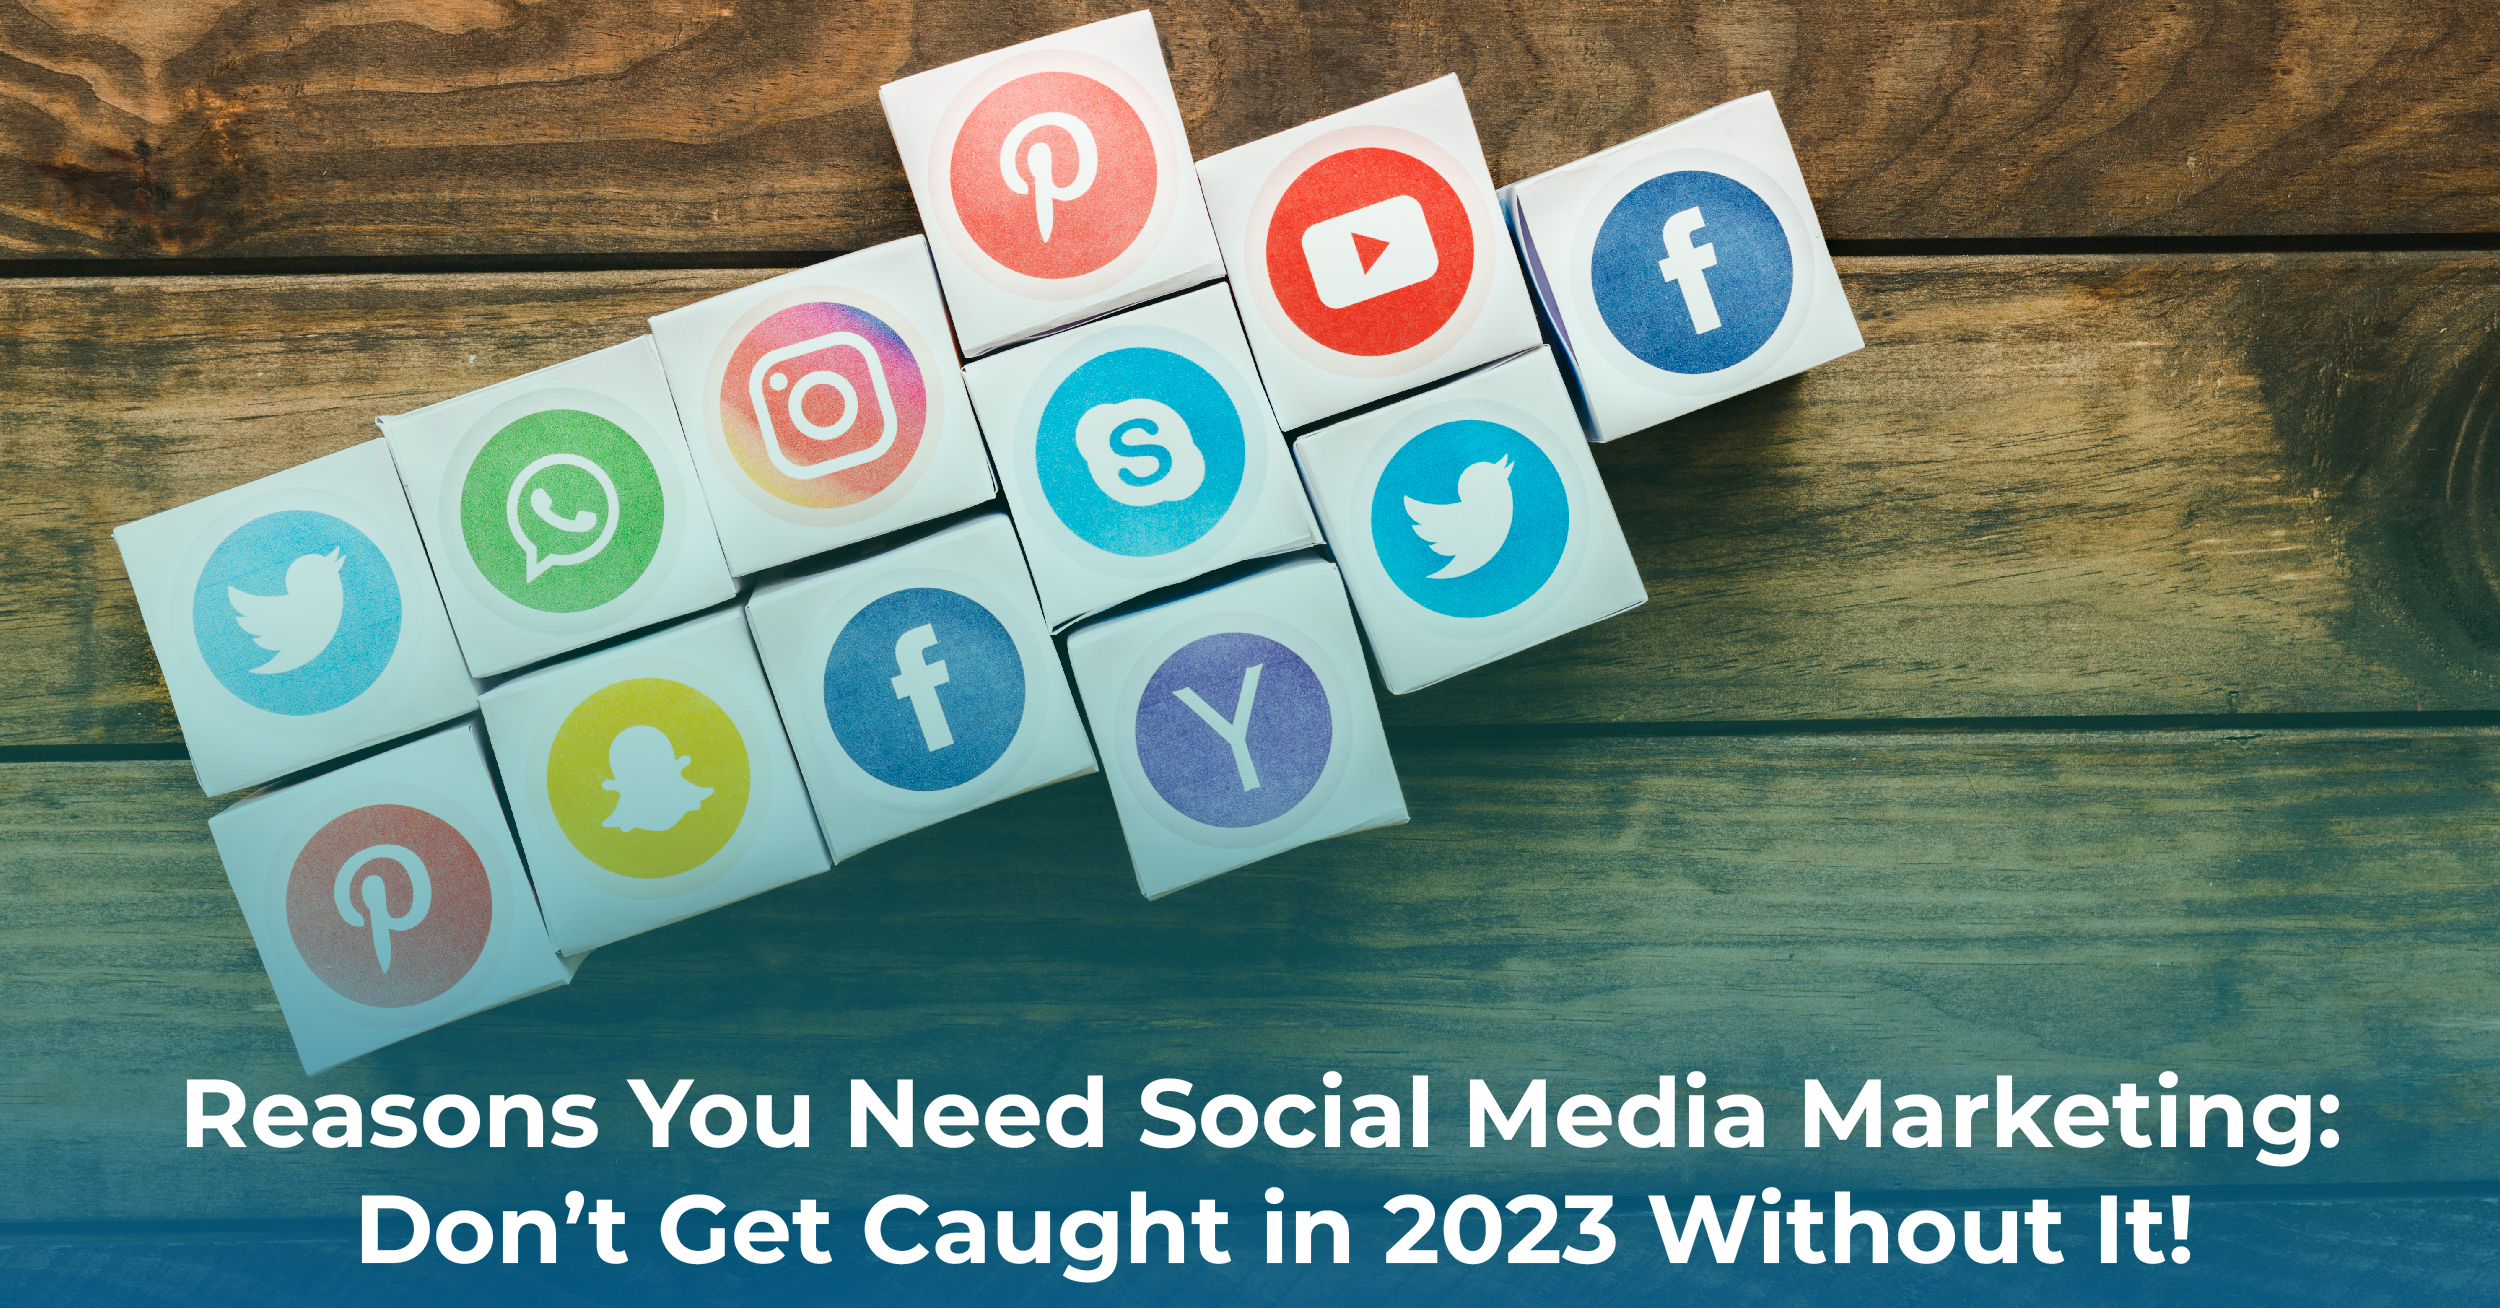 Reasons You Need Social Media Marketing: Don’t Get Caught in 2023 Without It!